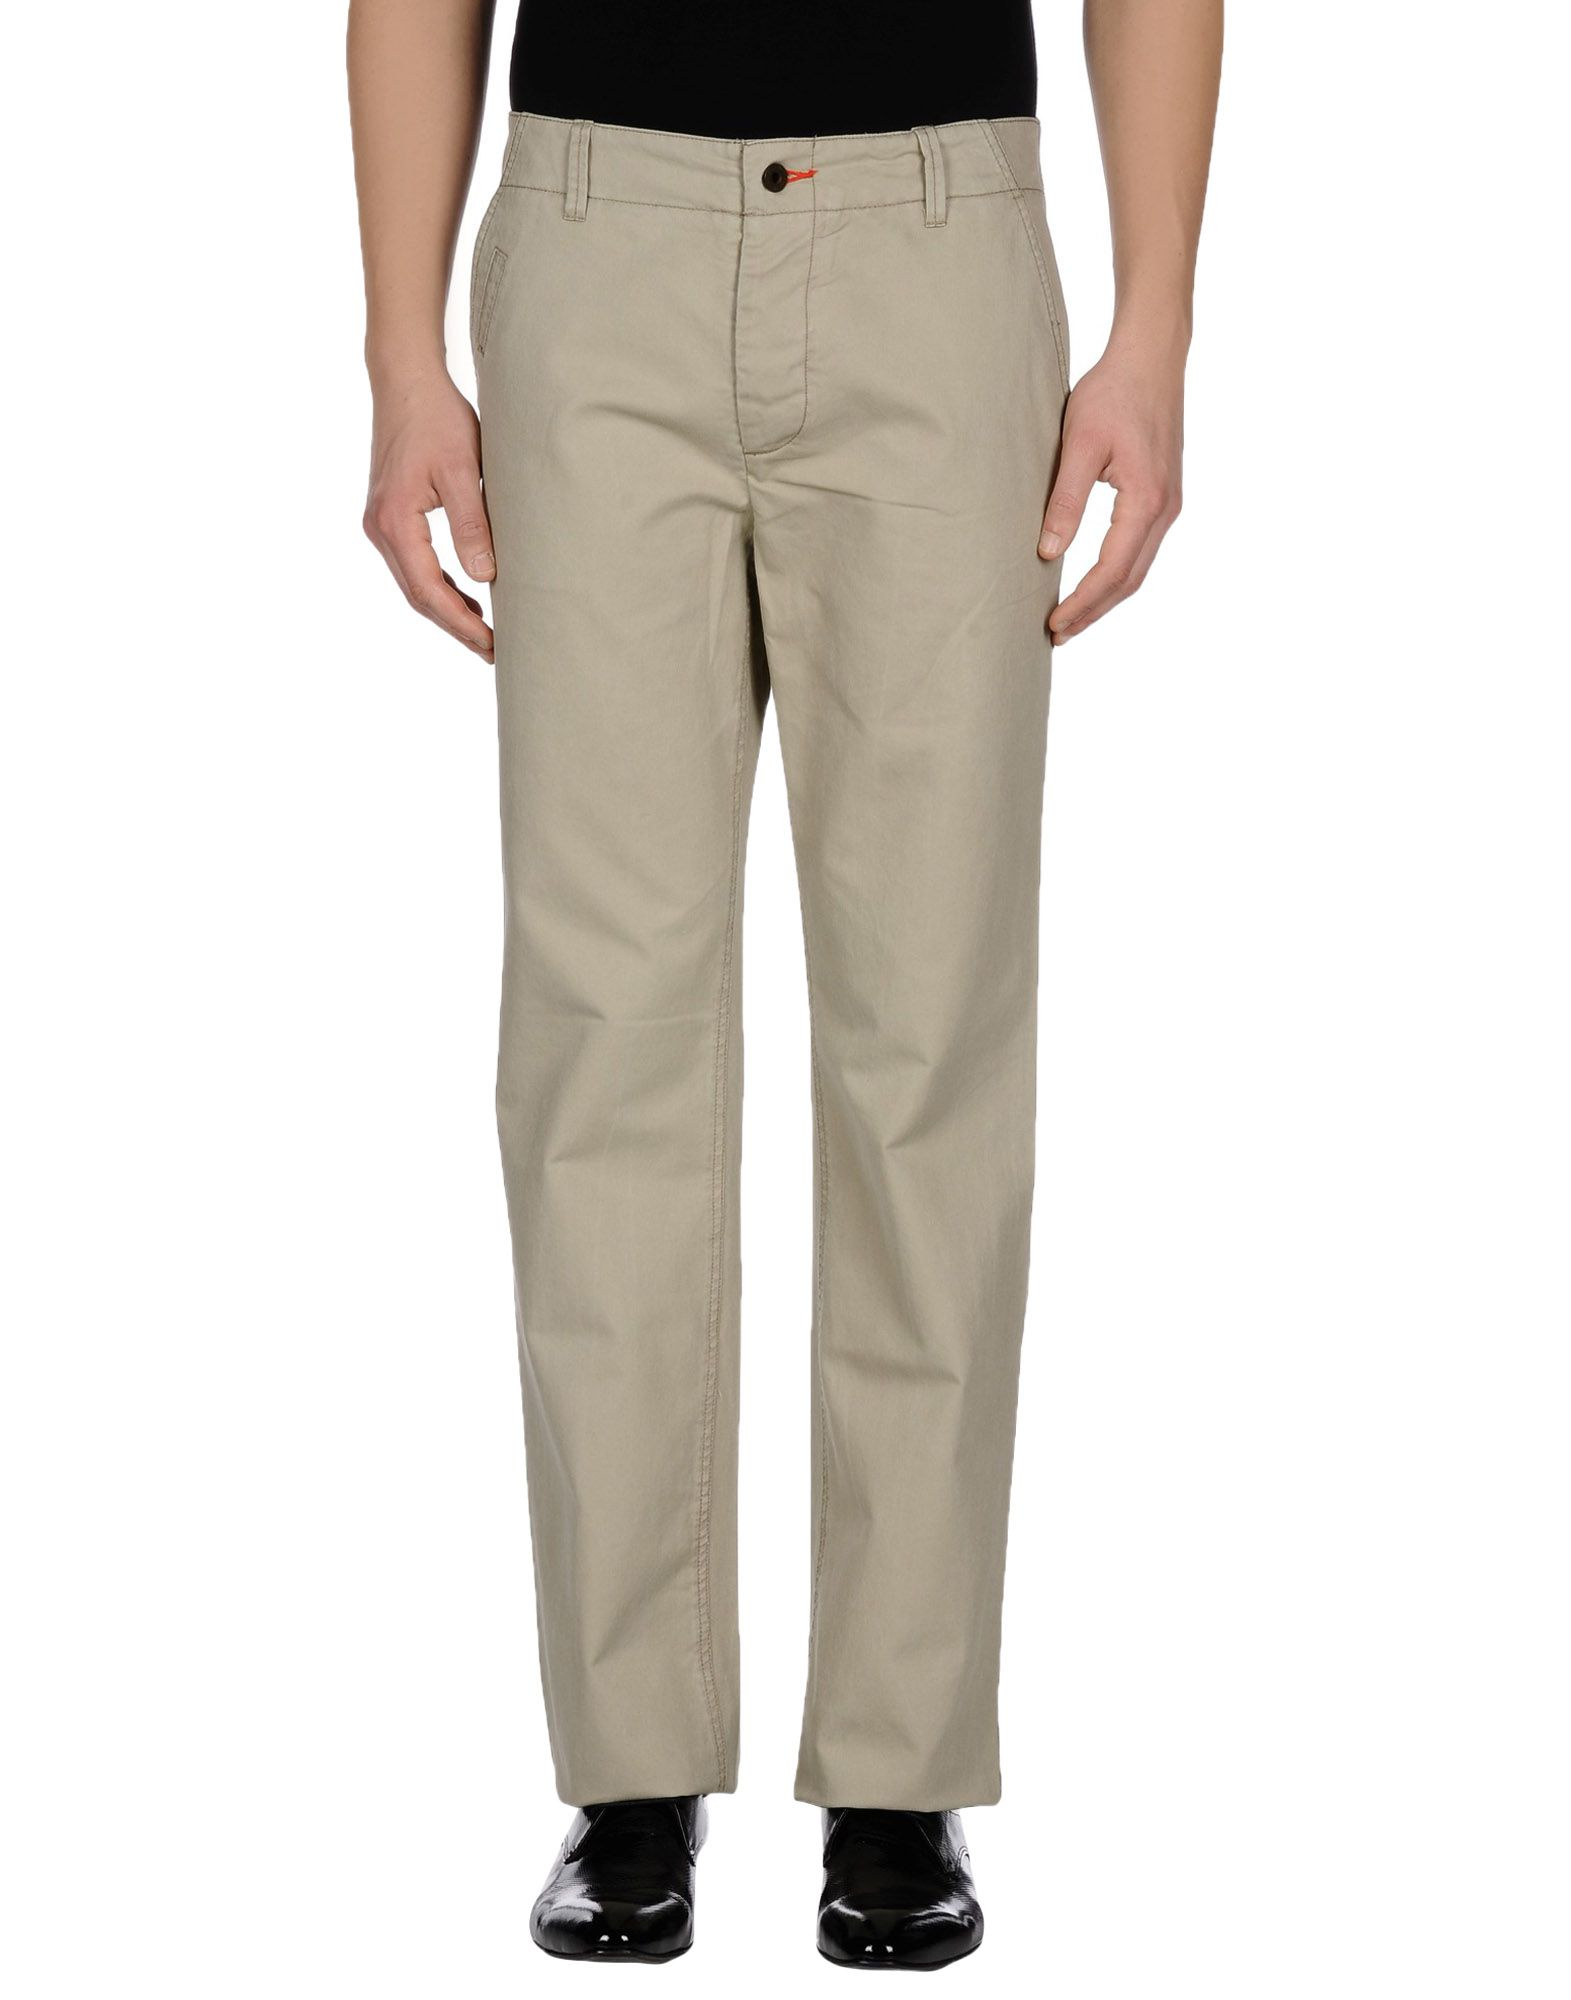 Lyst - Pepe Jeans Casual Pants in Natural for Men